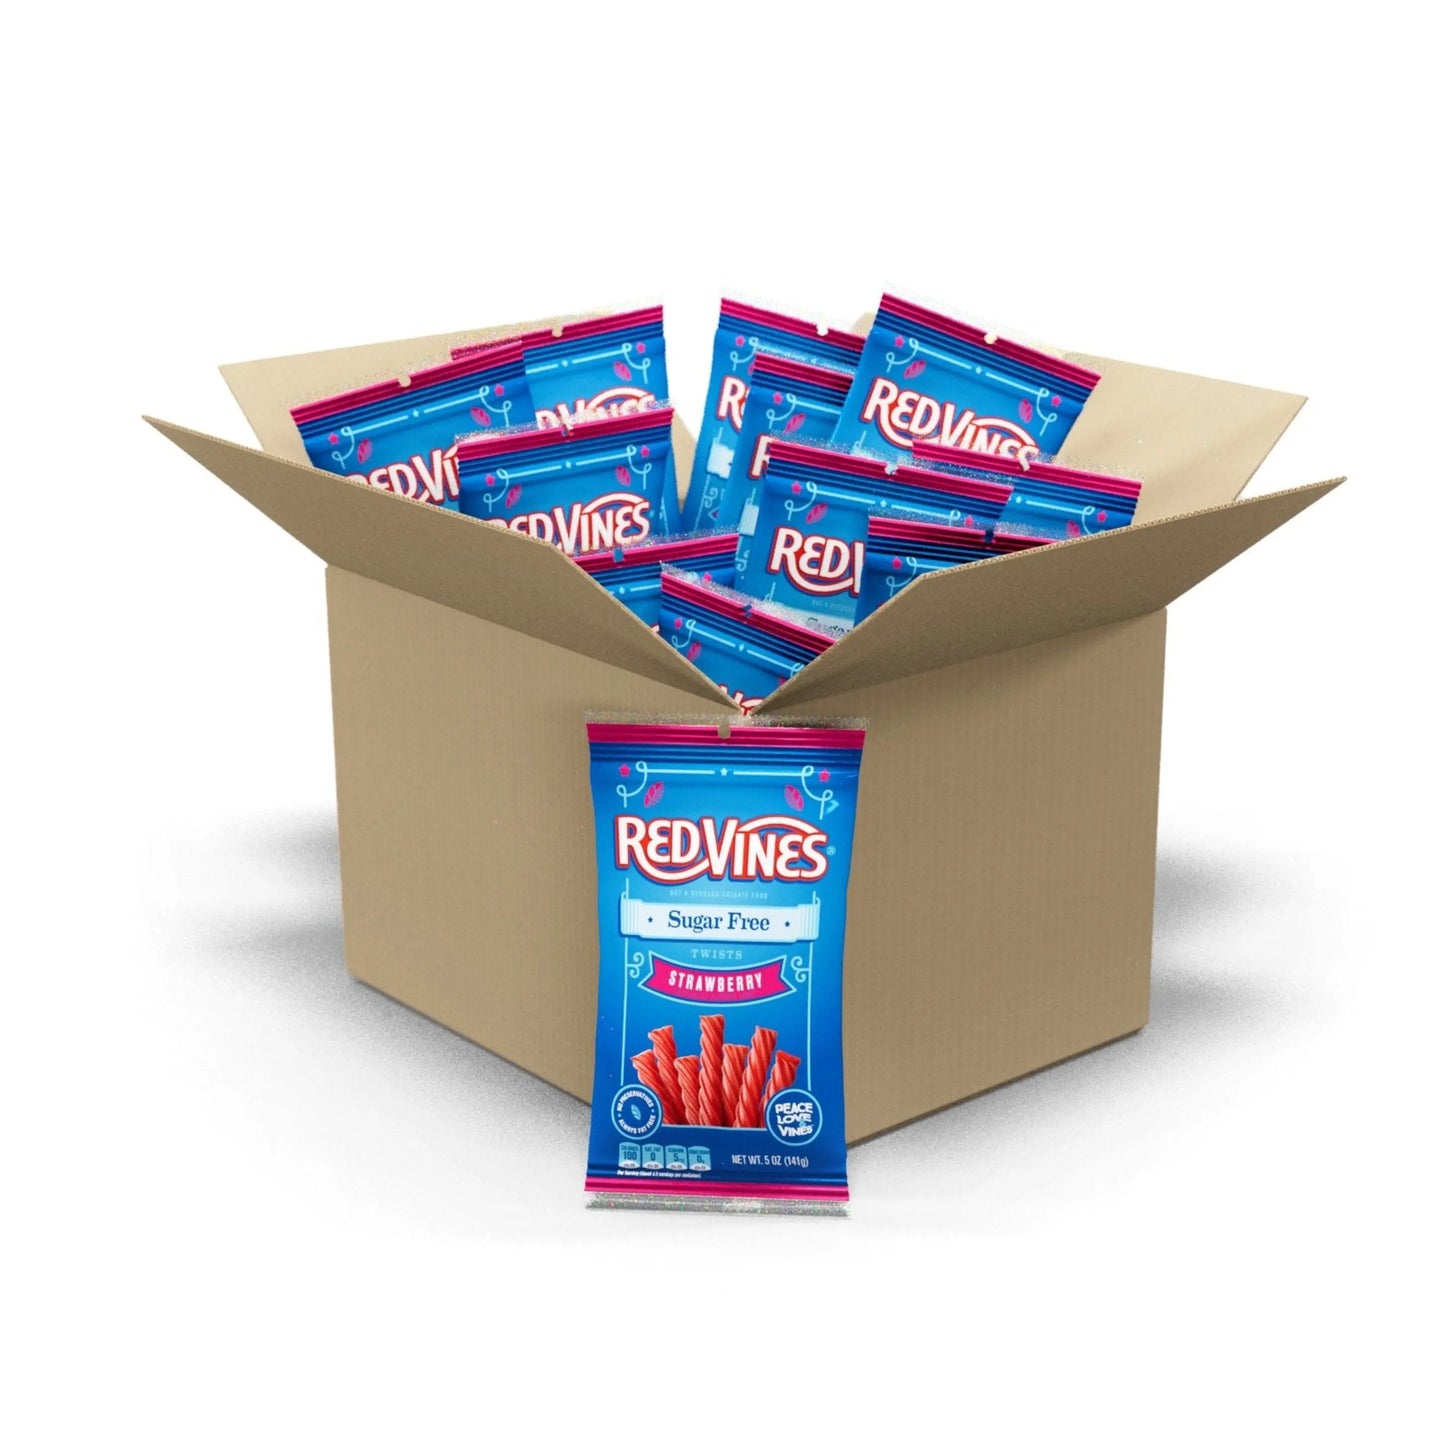 12 count box of RED VINES Sugar Free Strawberry Licorice Twists 5oz bags